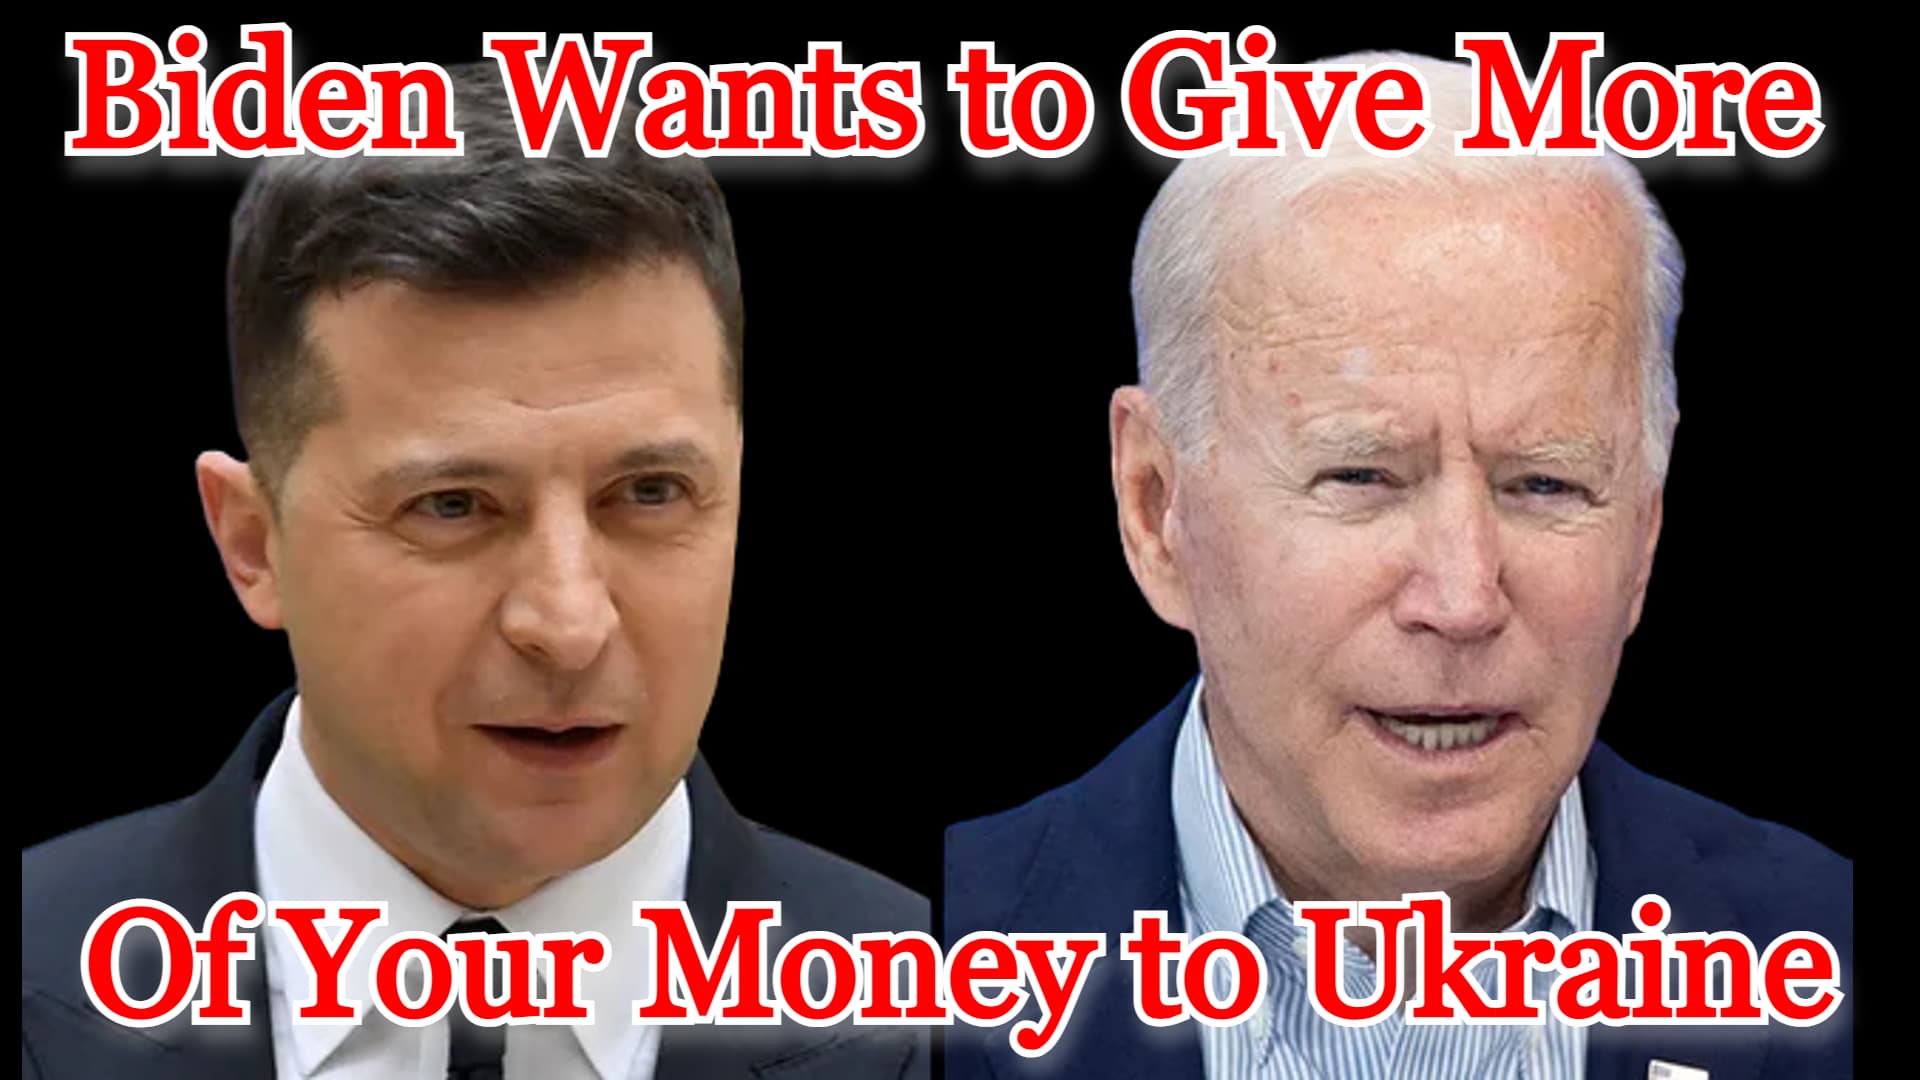 COI #458: Biden Wants to Give More of Your Money to Ukraine